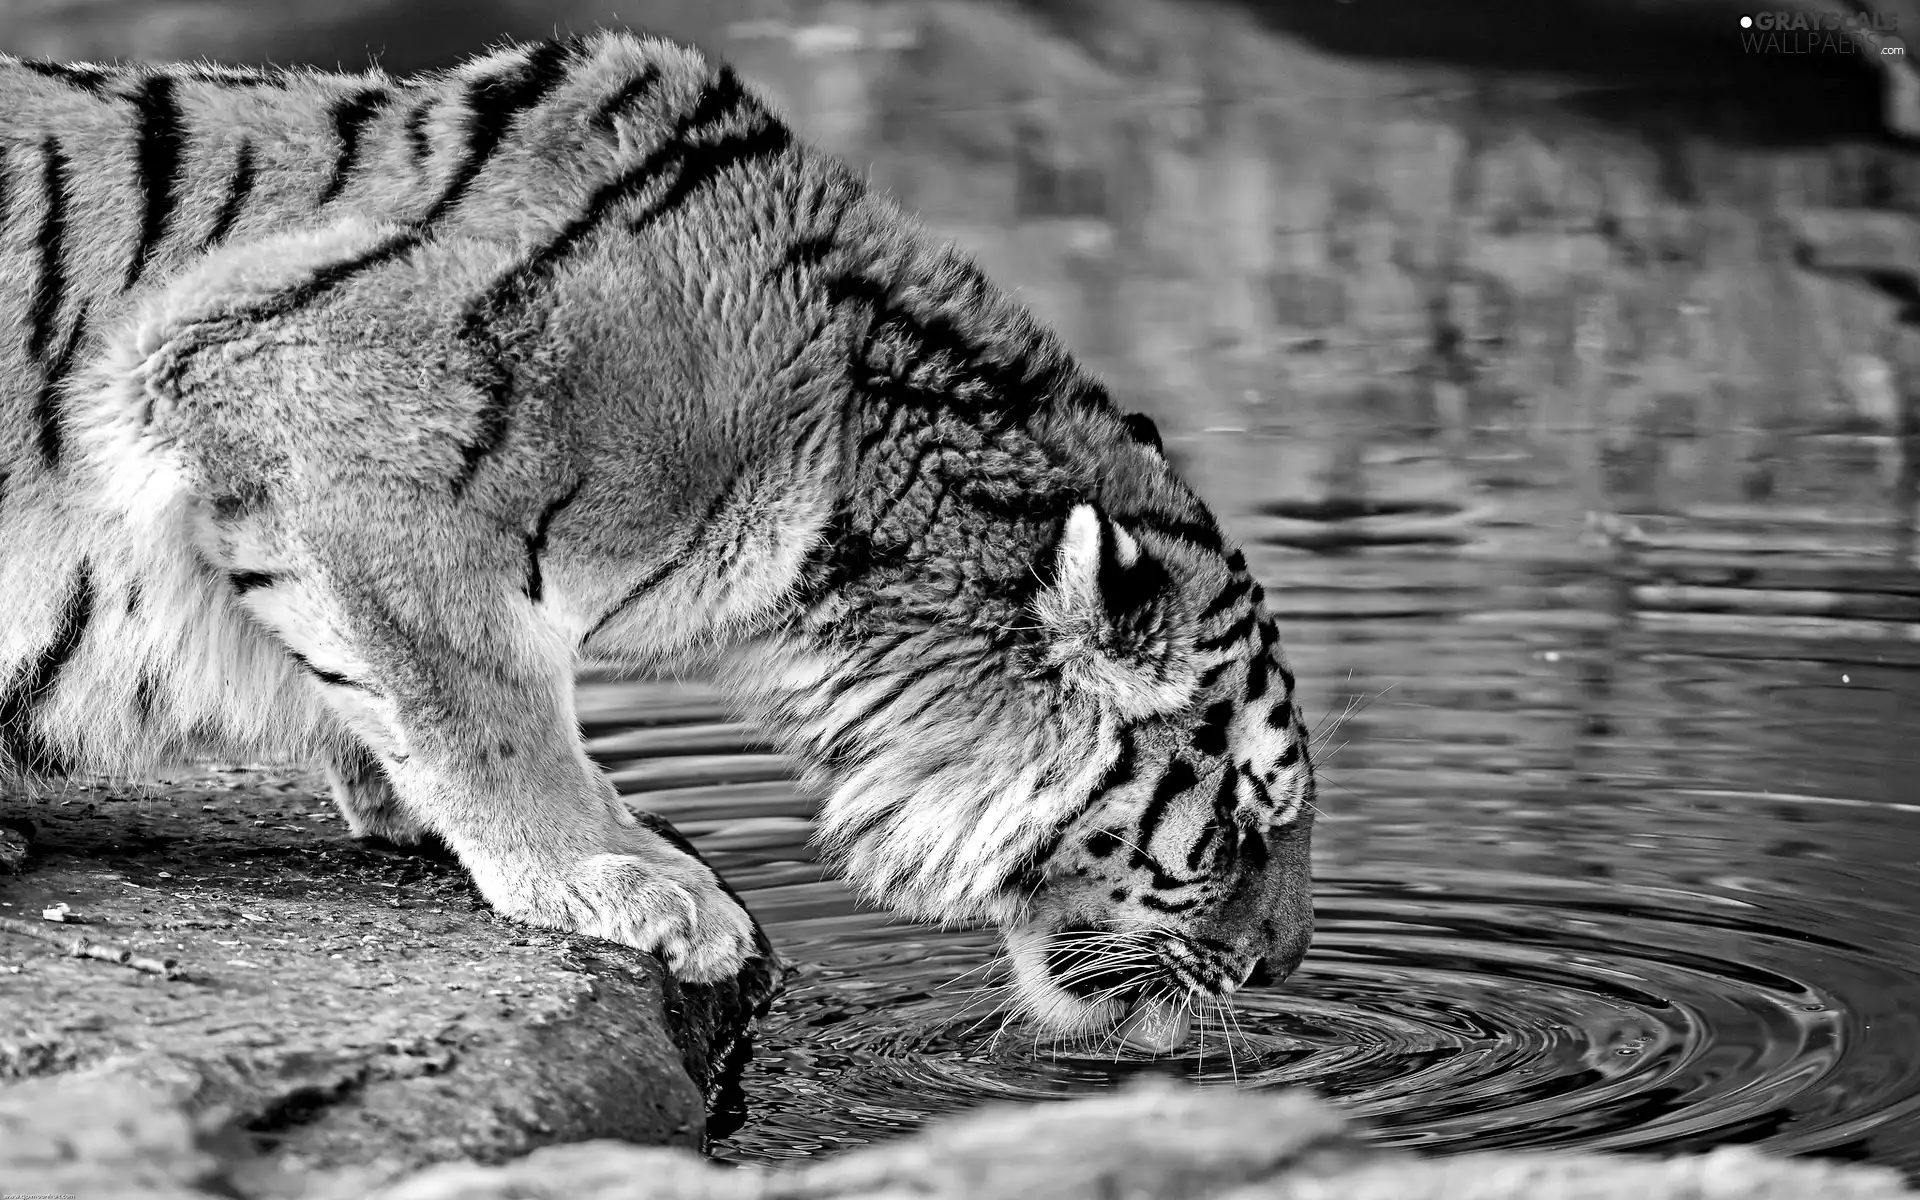 rocks, tiger, watering place